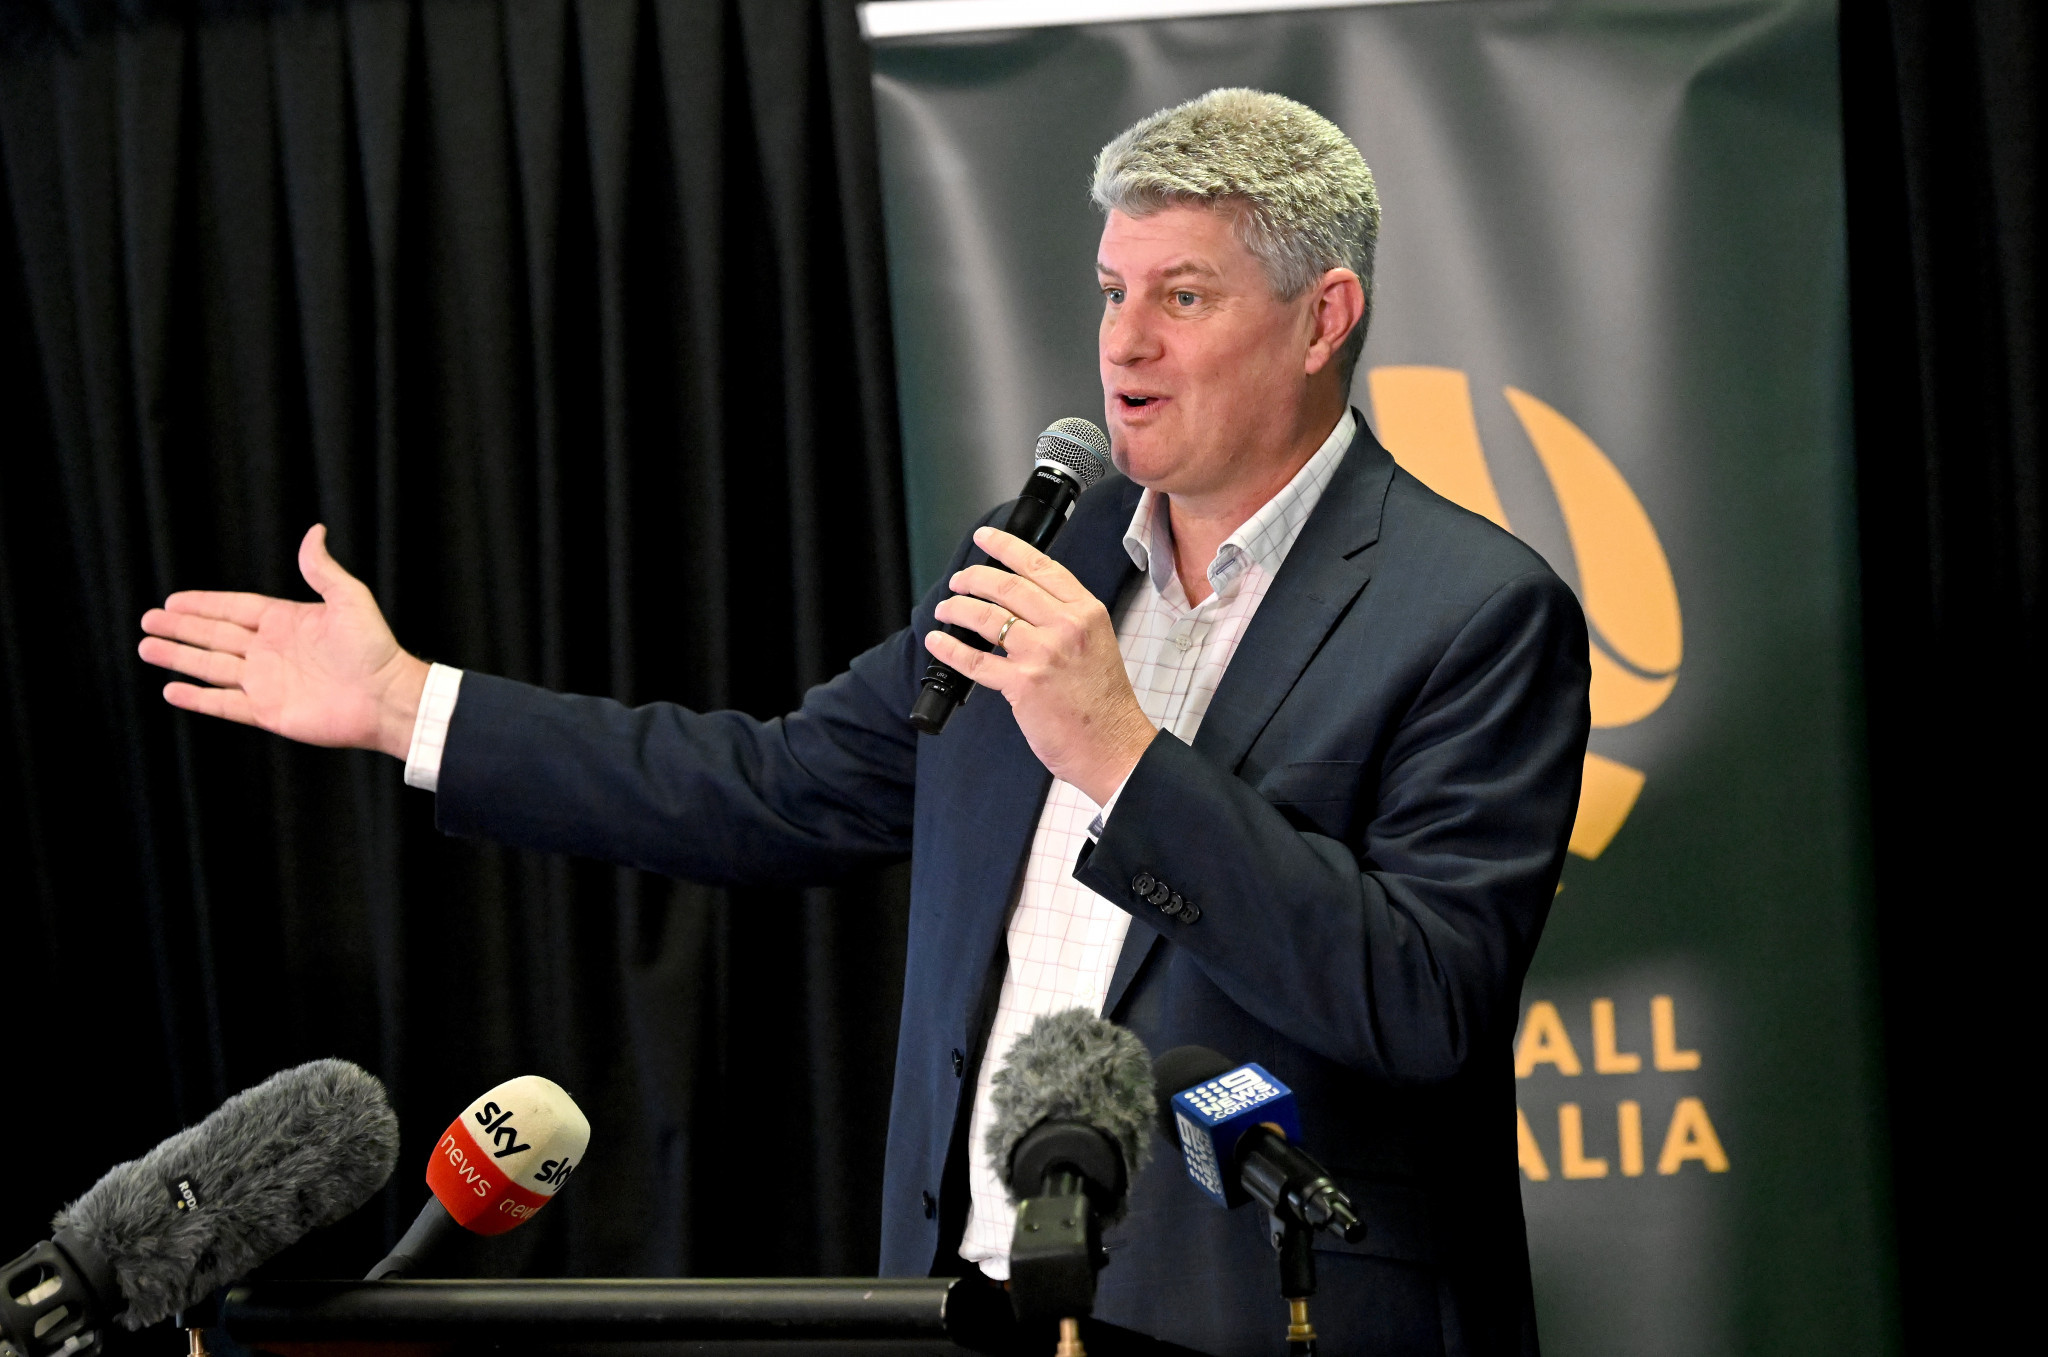 Queensland Sport Minister Stirling Hinchliffe said he was looking forward to the staging of the Step Up Oceania Conference that is due to start tomorrow ©Getty Images